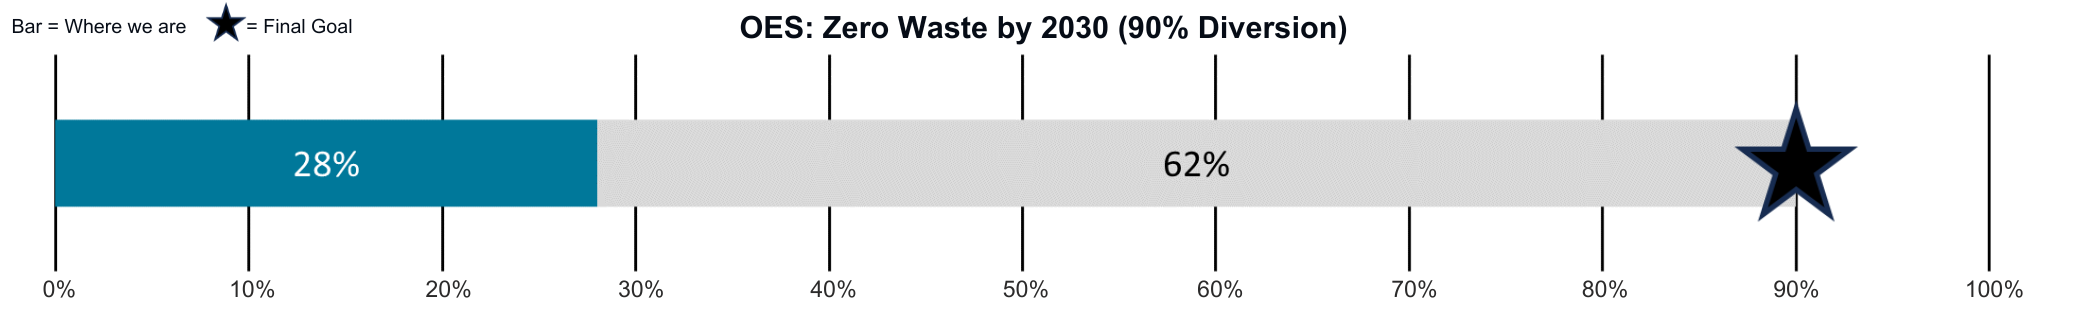 OES_ Zero waste by 2030 with a 90% diversion with progress at 28%